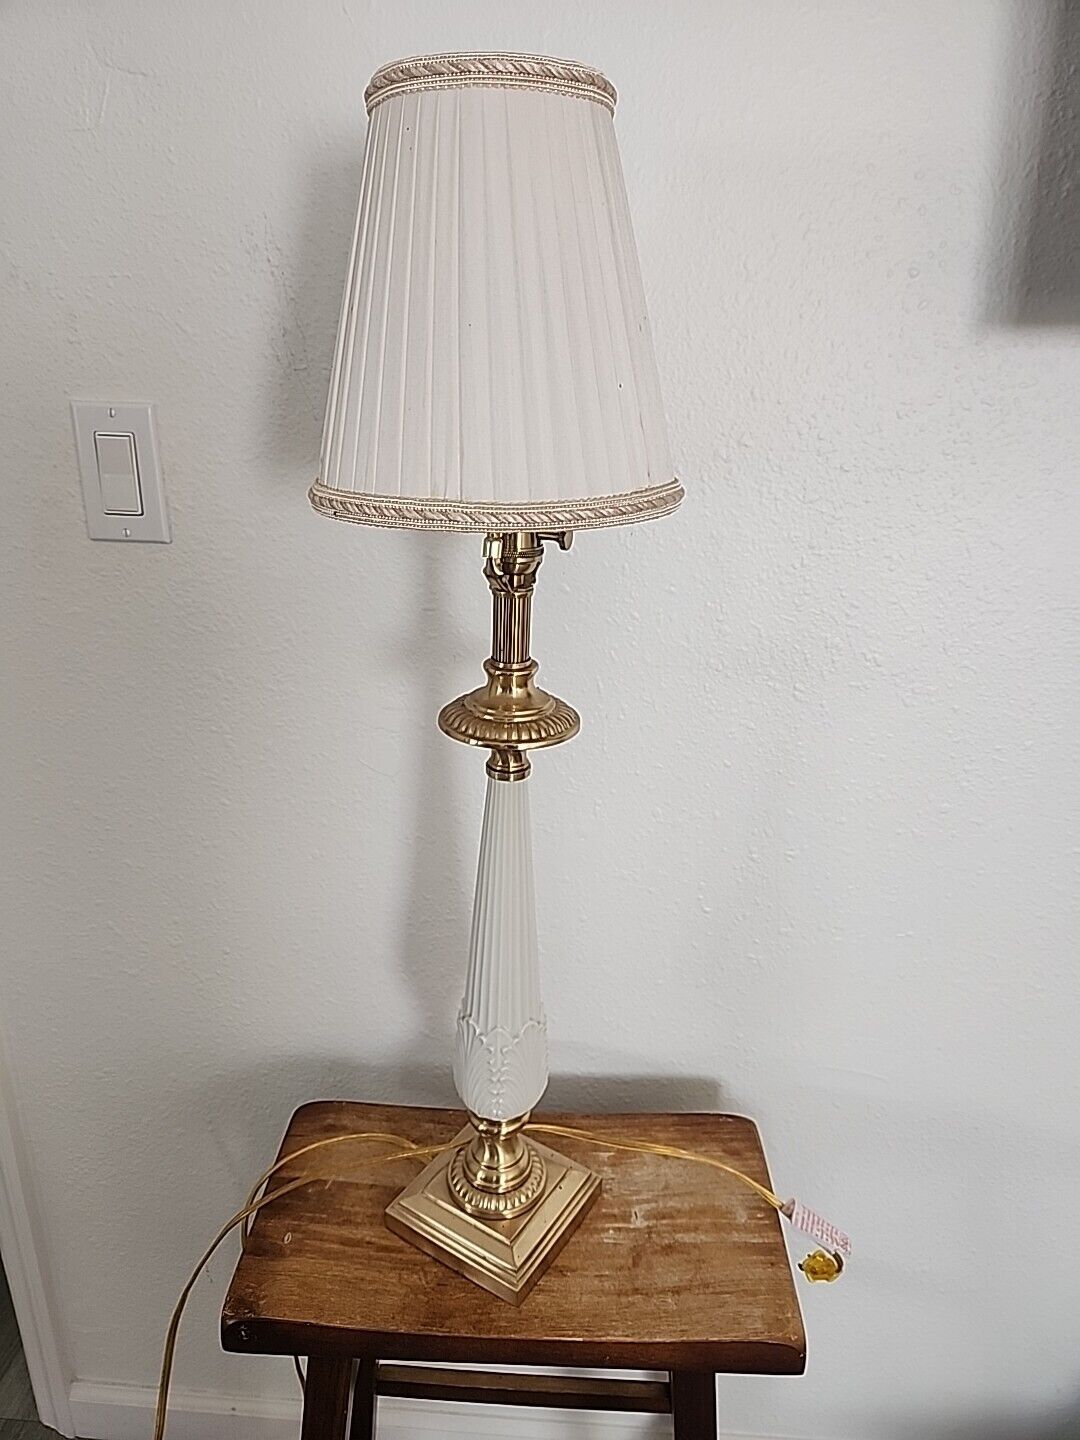 Lenox by Quoizel 31.5” Electric Table Lamp Orig. Shade Porcelain & Brass LX6699H